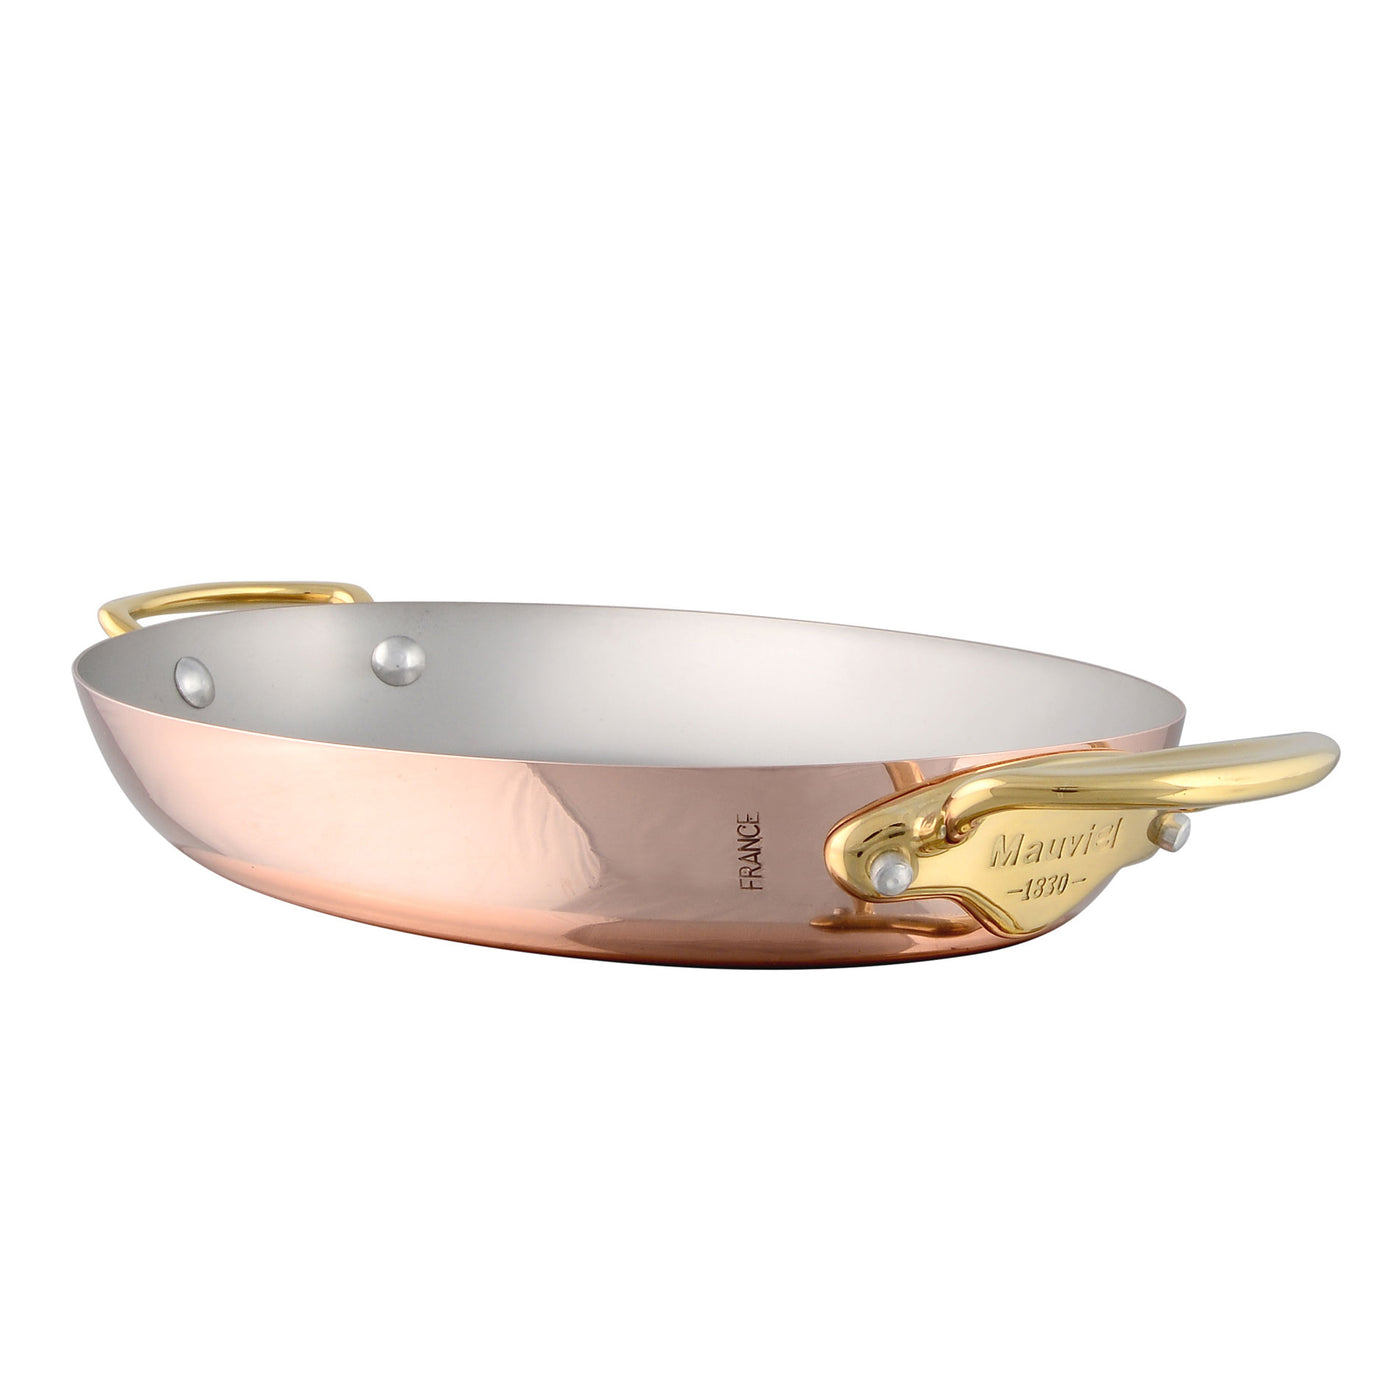 Mauviel M'heritage M150B Copper Oval Pan with Bronze Handles, 14-in - Kitchen Universe